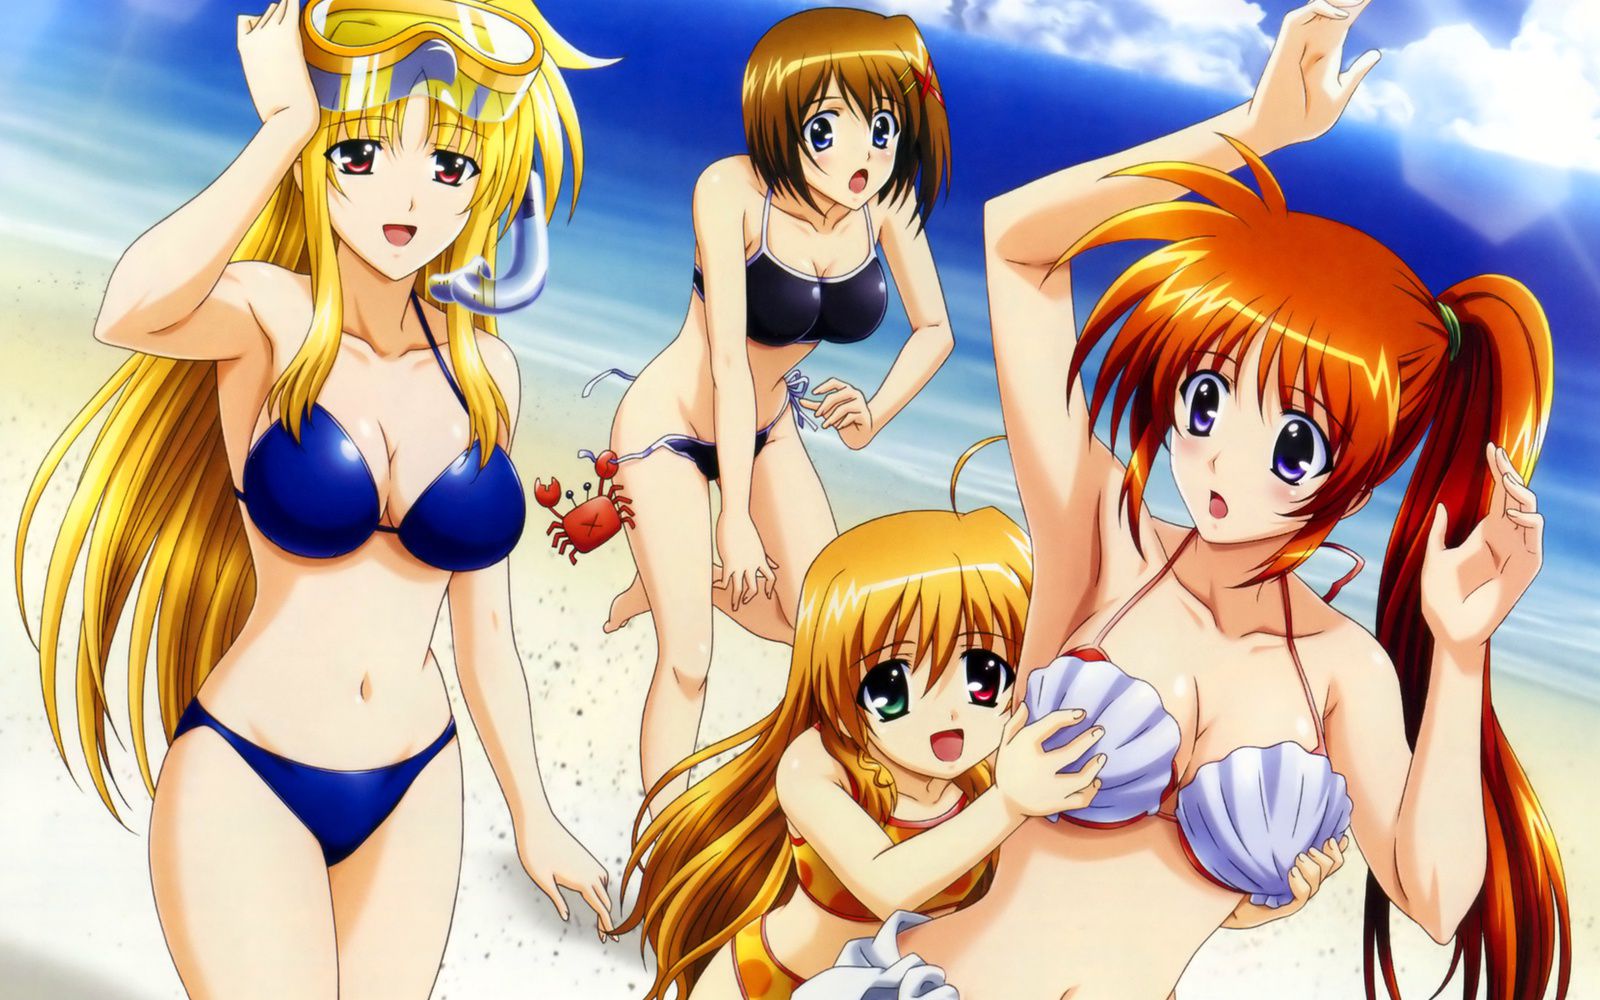 [Magical Girl Lyrical Nanoha] is a thread that will put a random image of erotic 3